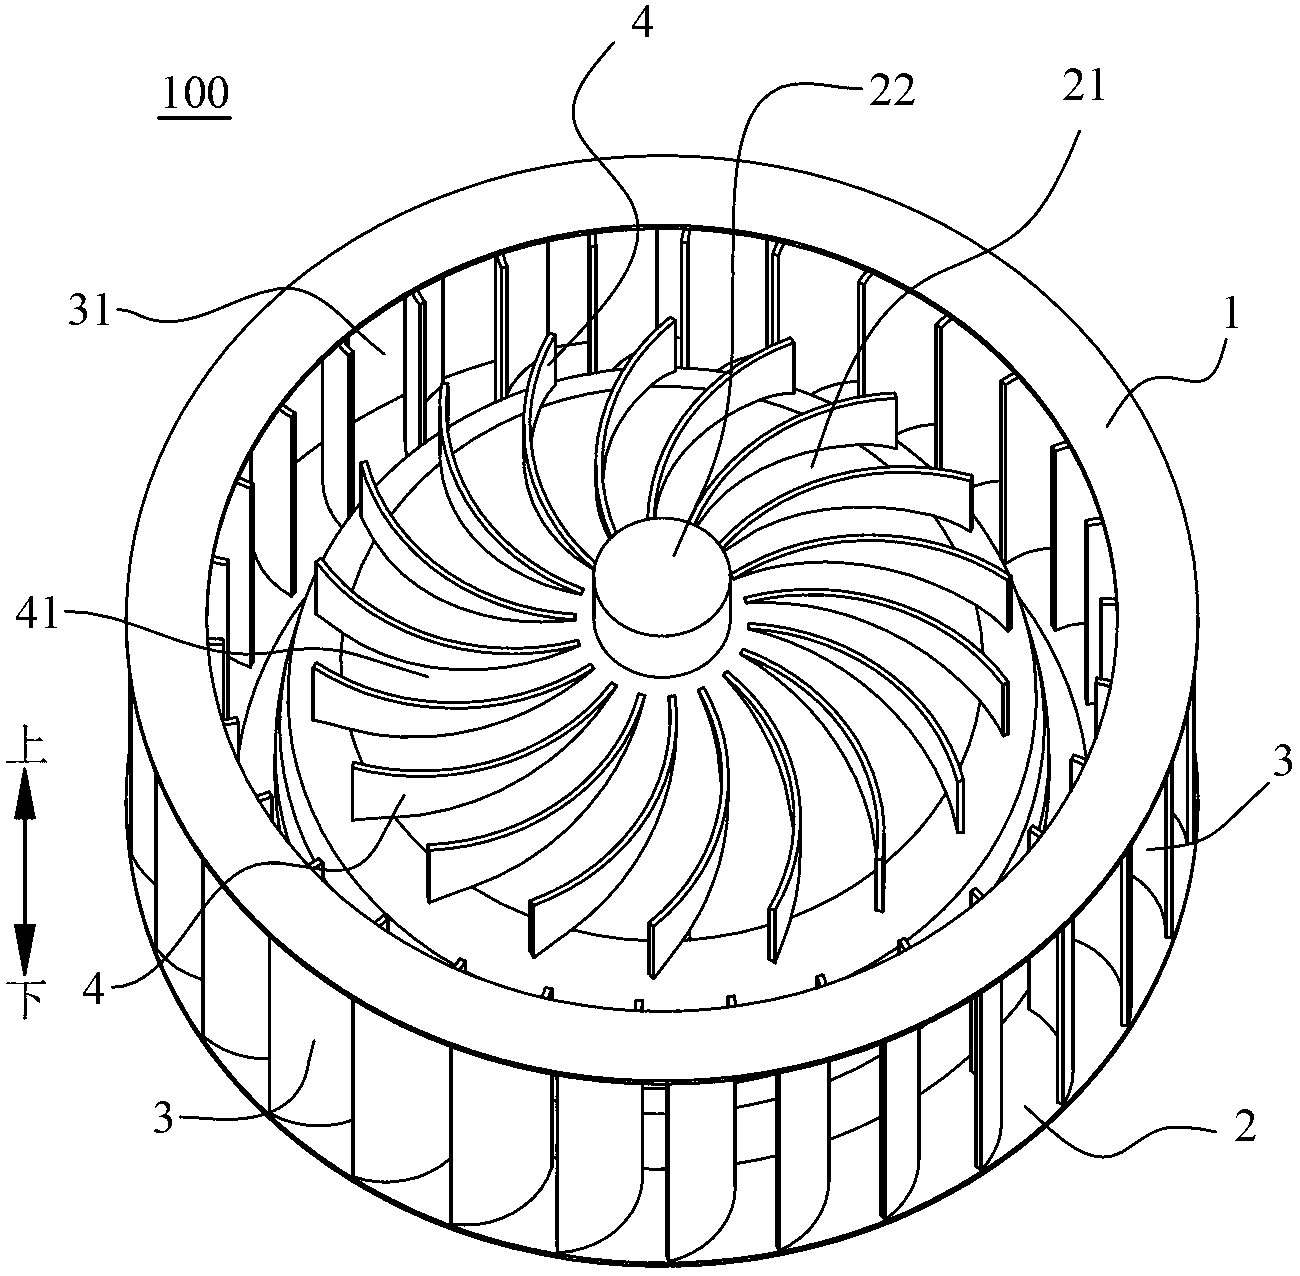 Centrifugal fan and clothes dryer with same